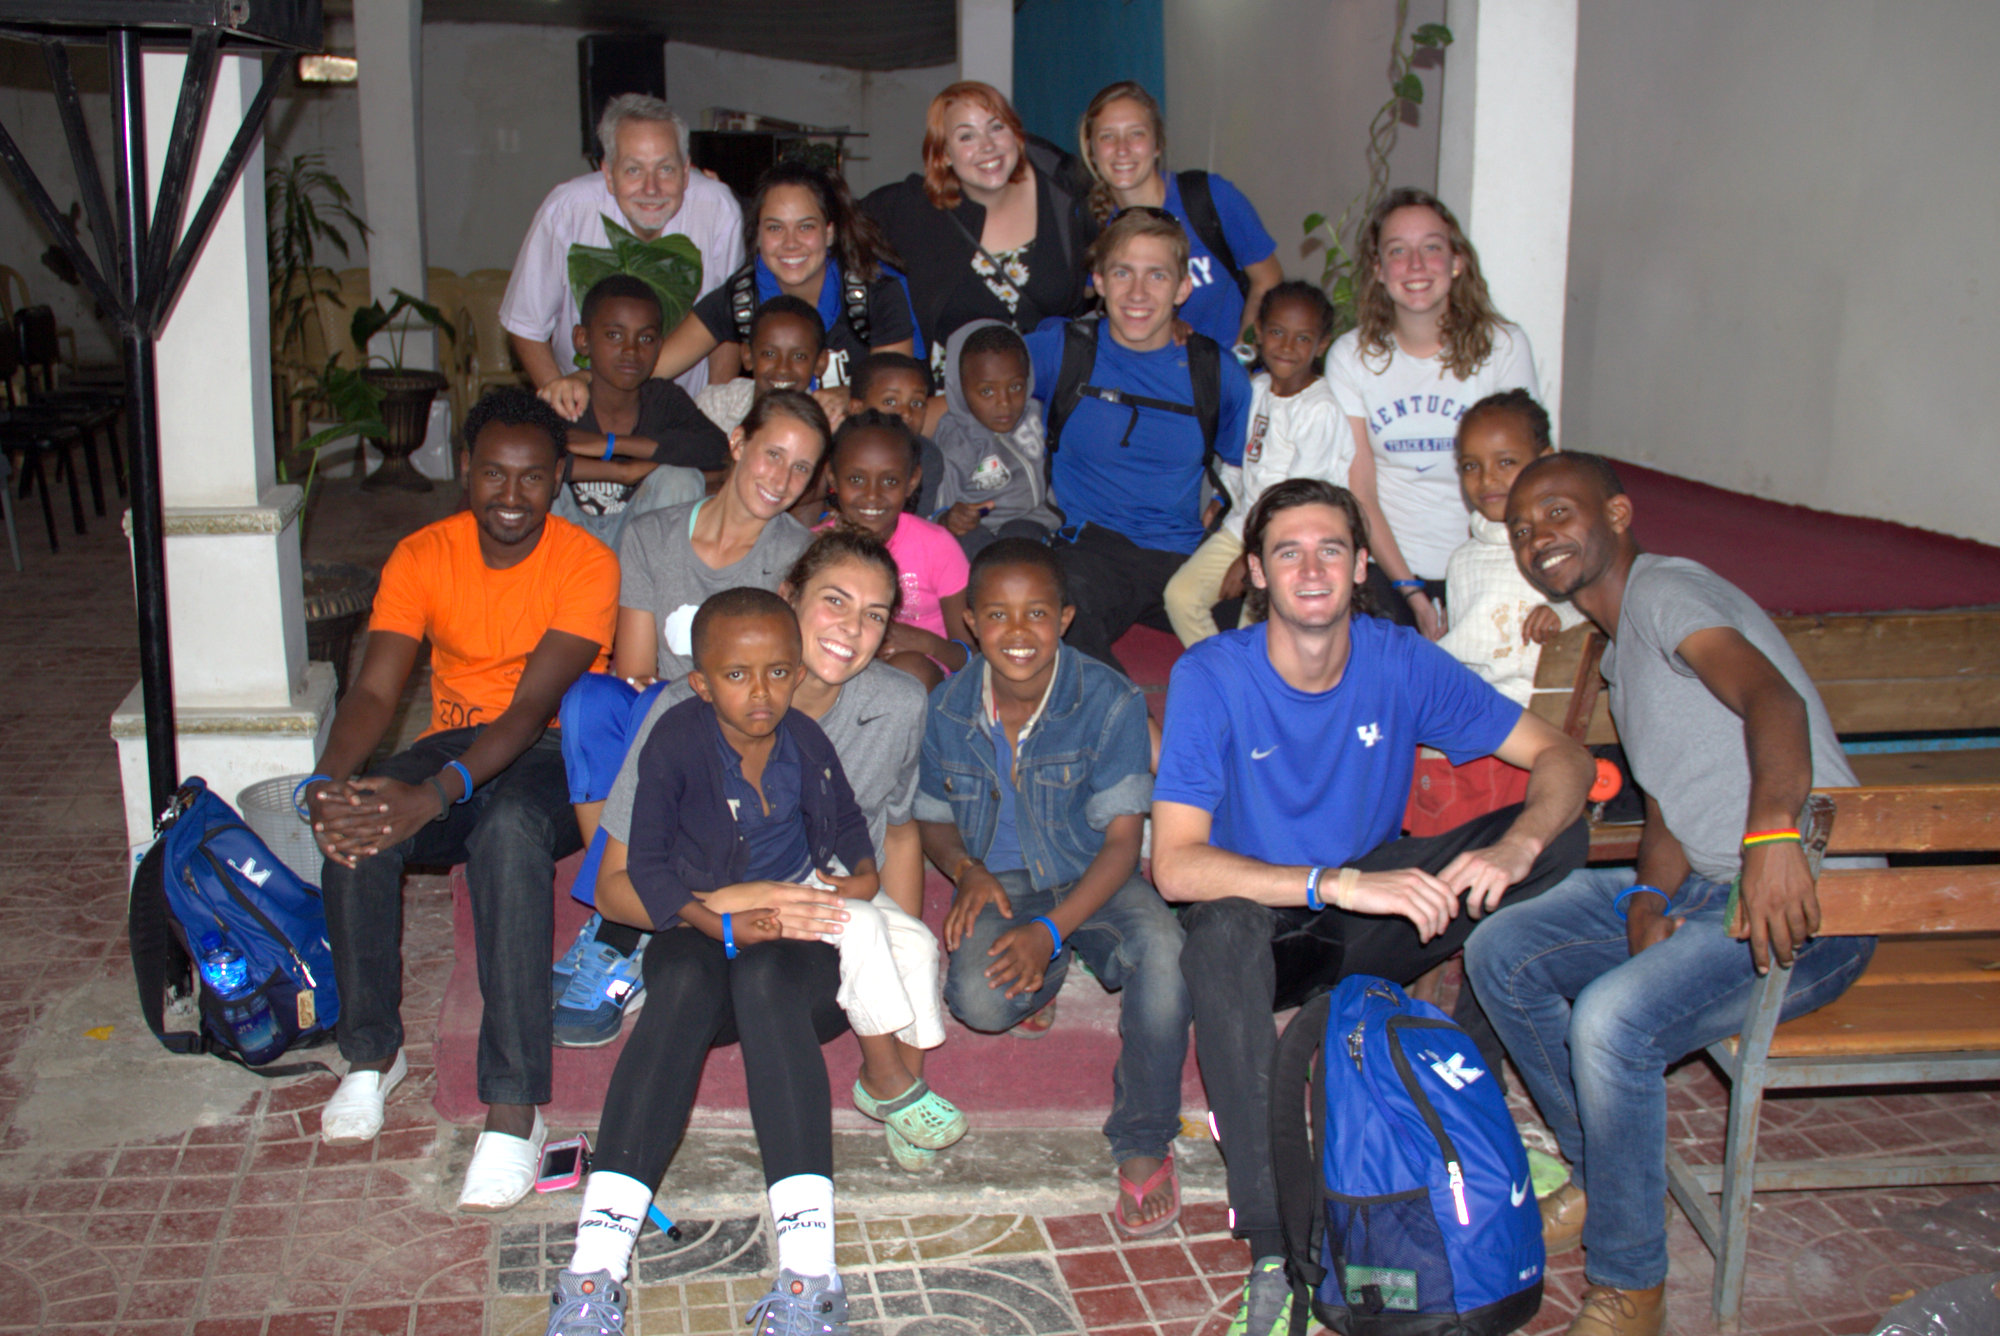 Ethiopia service trip reflections: Lanier, Fox moved on day 1